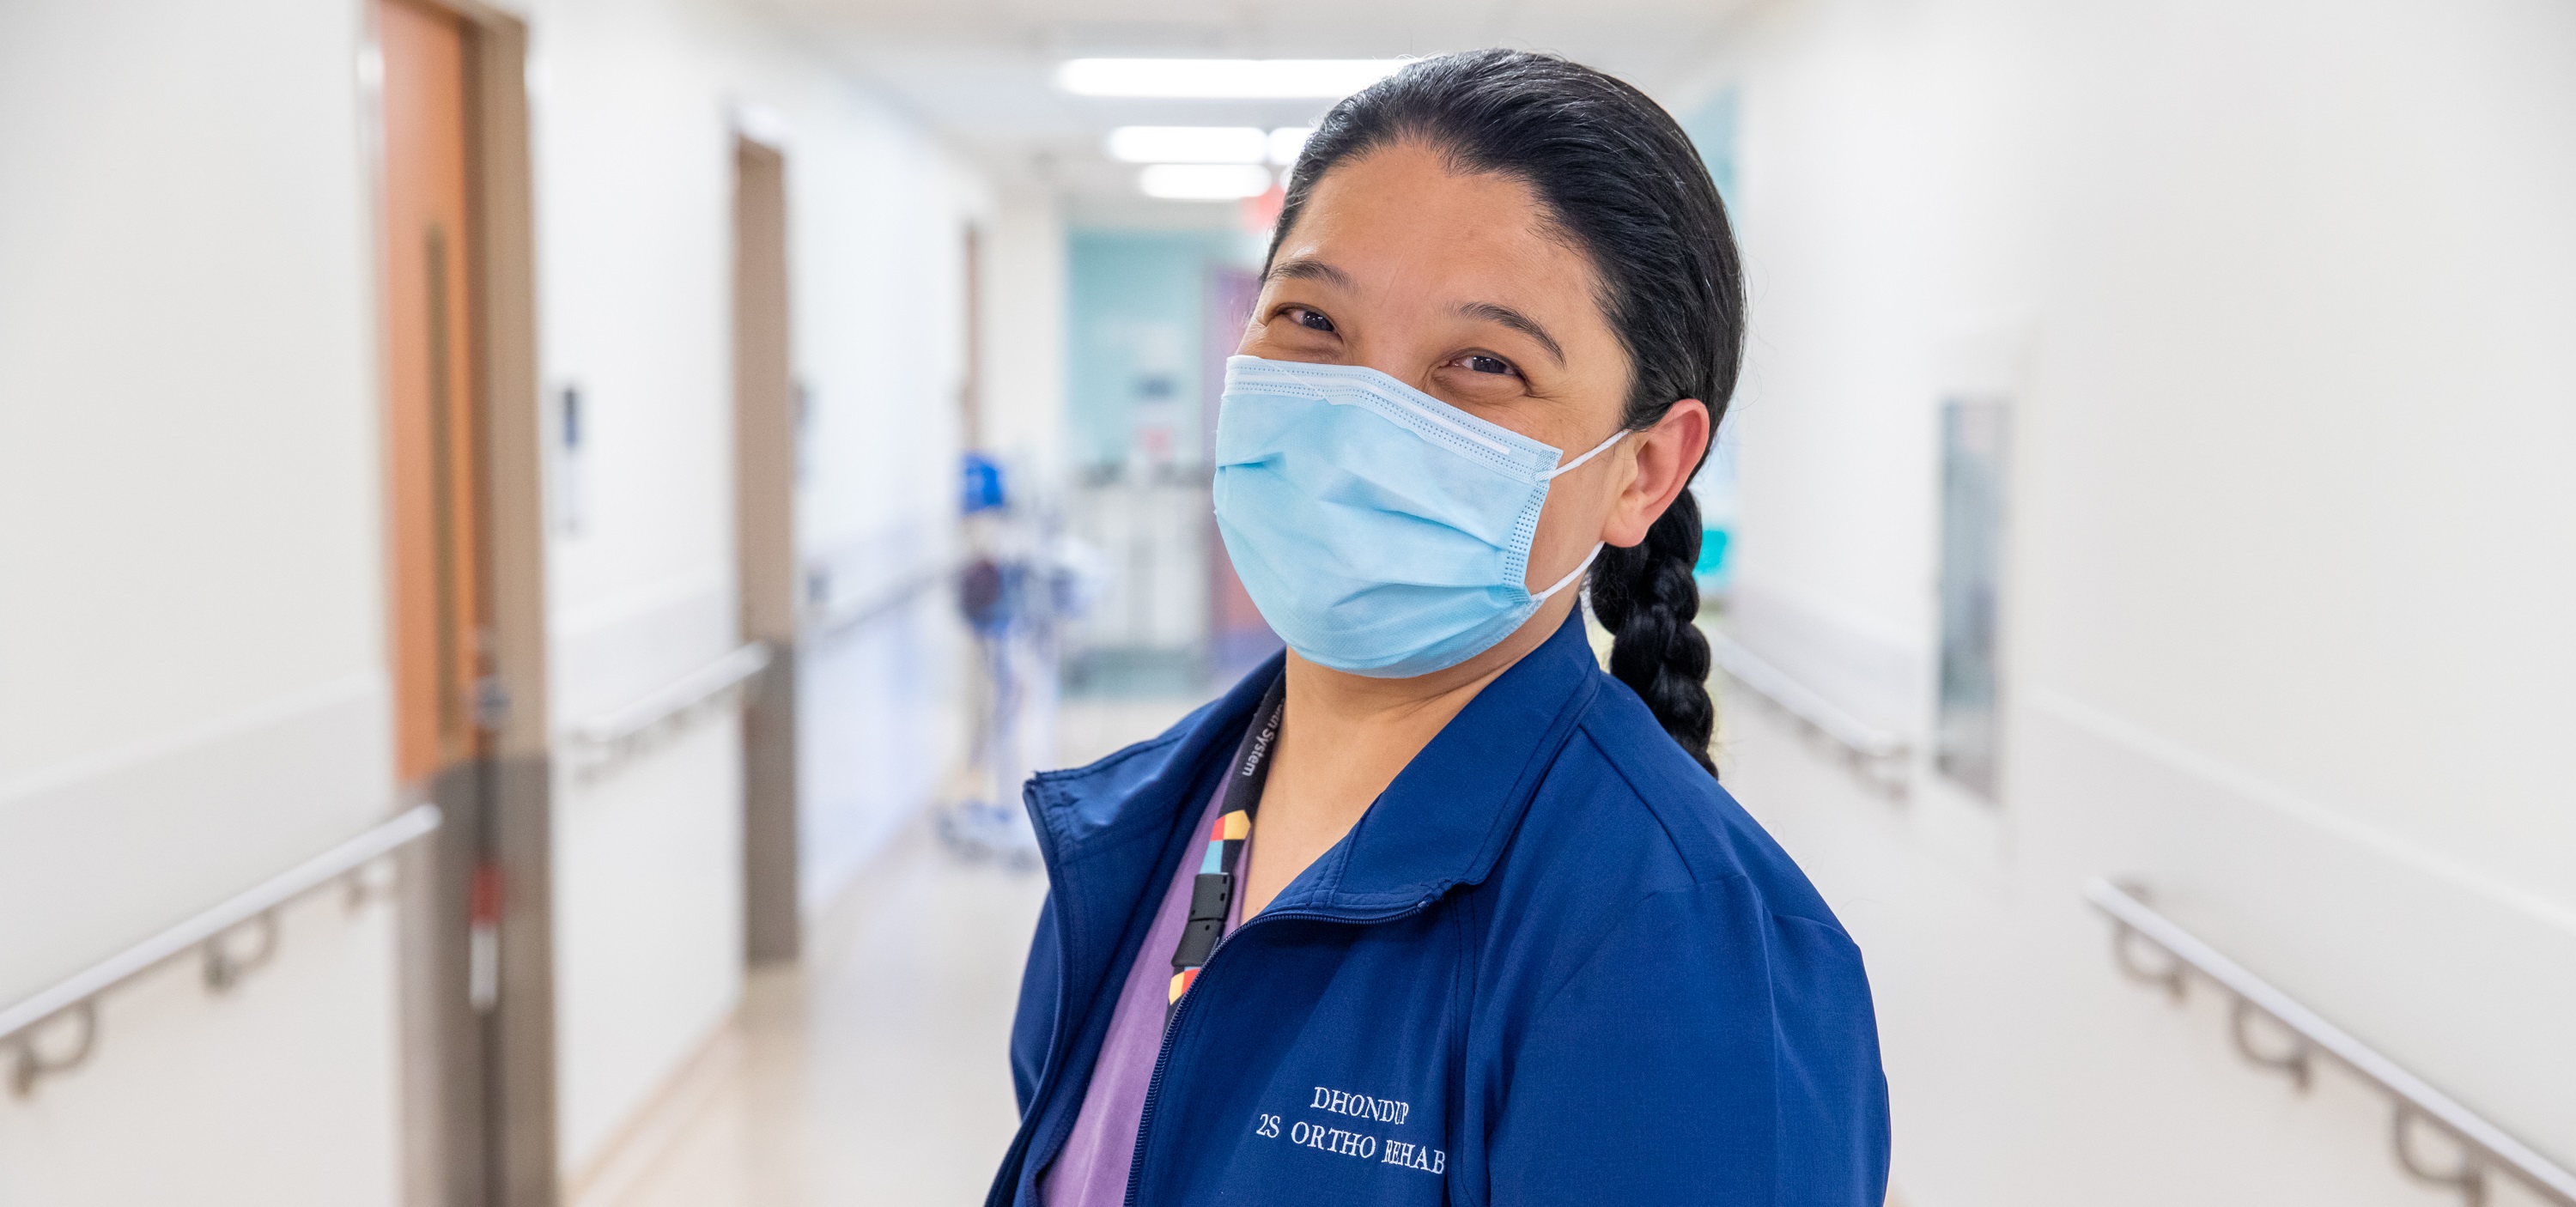 A nurse stands in a hospital hallway. She wearing a mask and looking at the camera, her eyes show that she is smiling under her mask.